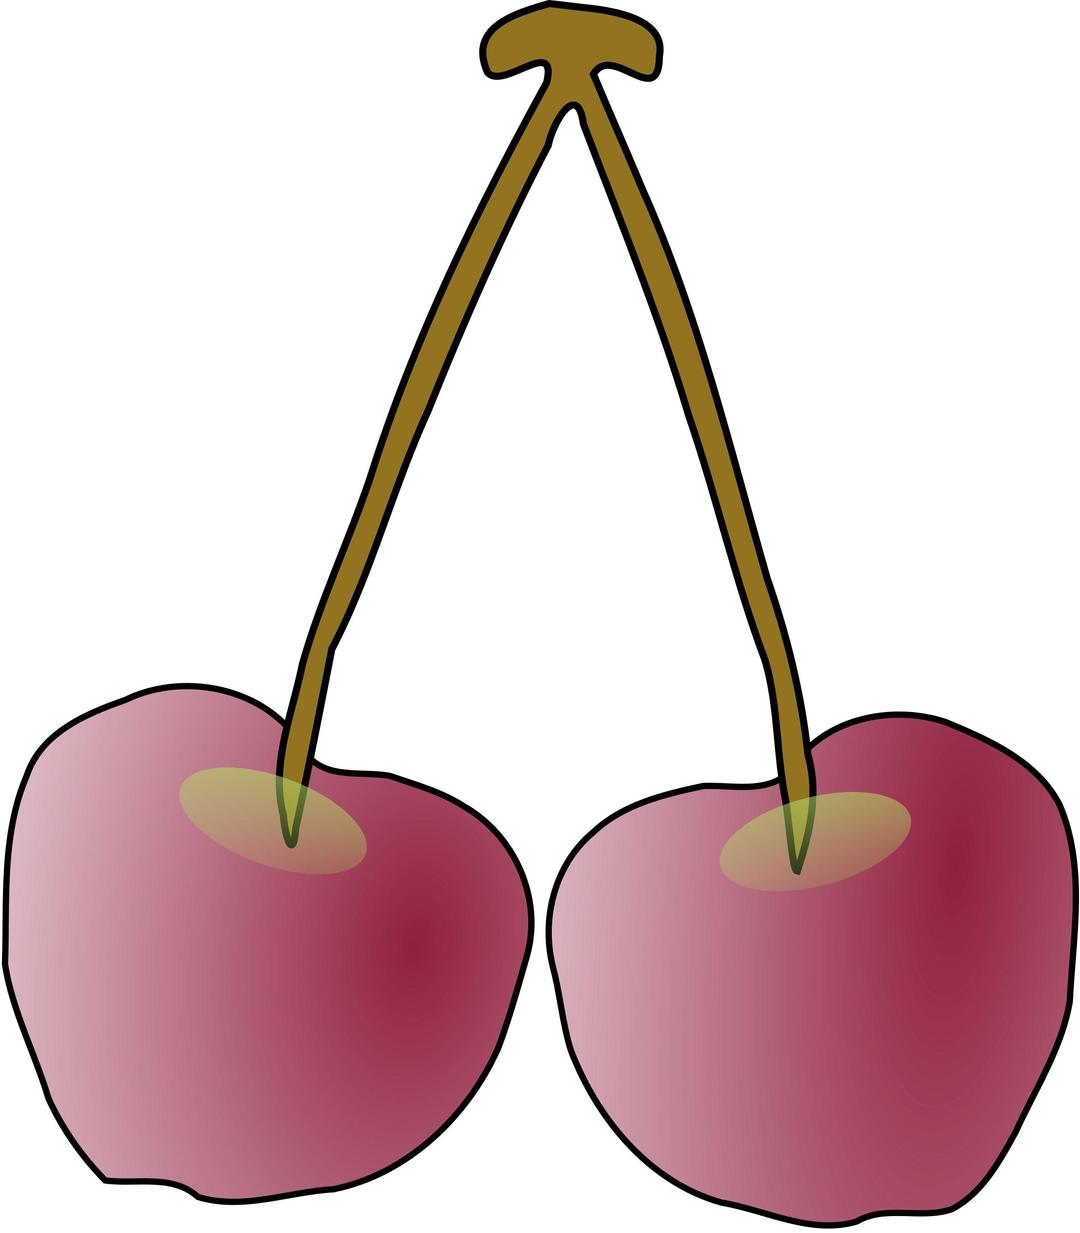 a pair of Oregon Columbia Gorge cherries png transparent